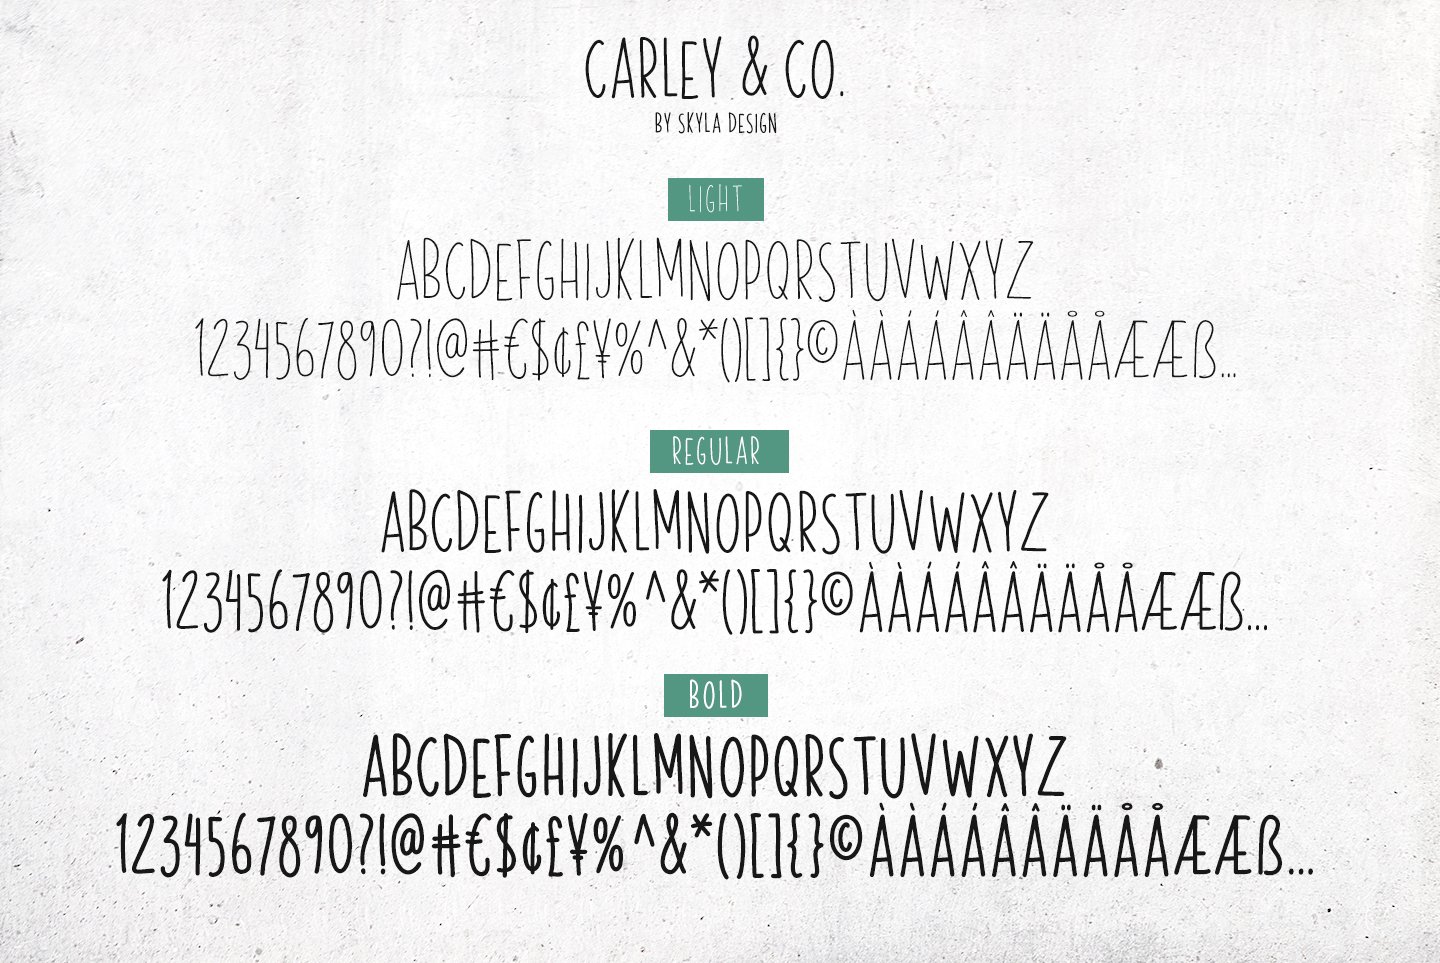 carley co preview 05 603